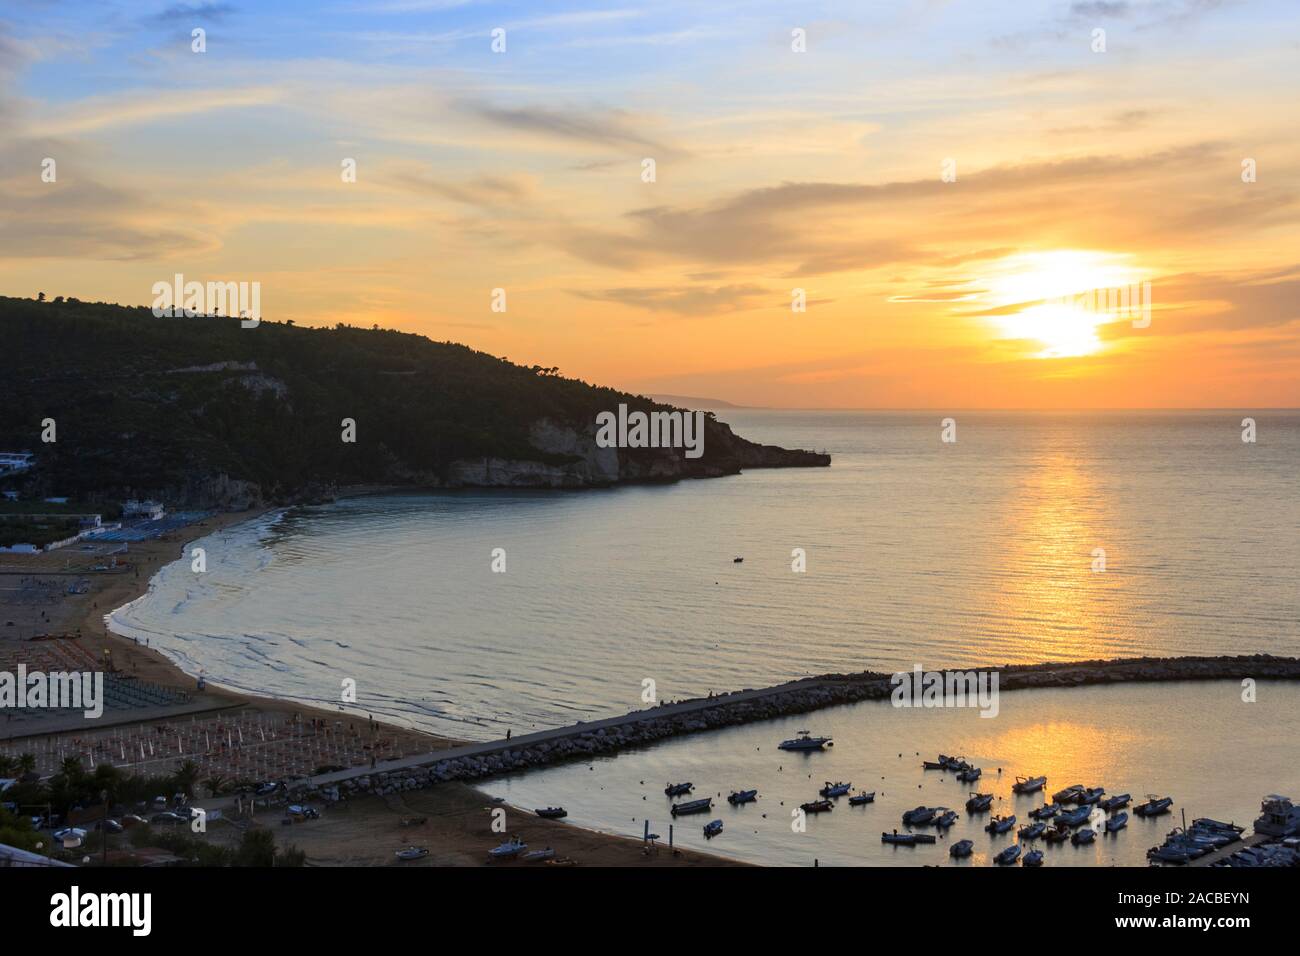 Panoramic view of the bay of Peschici at sunset: the marina and the sandy beach, Italy (Puglia). Peschici is famous for its seaside resorts. Stock Photo